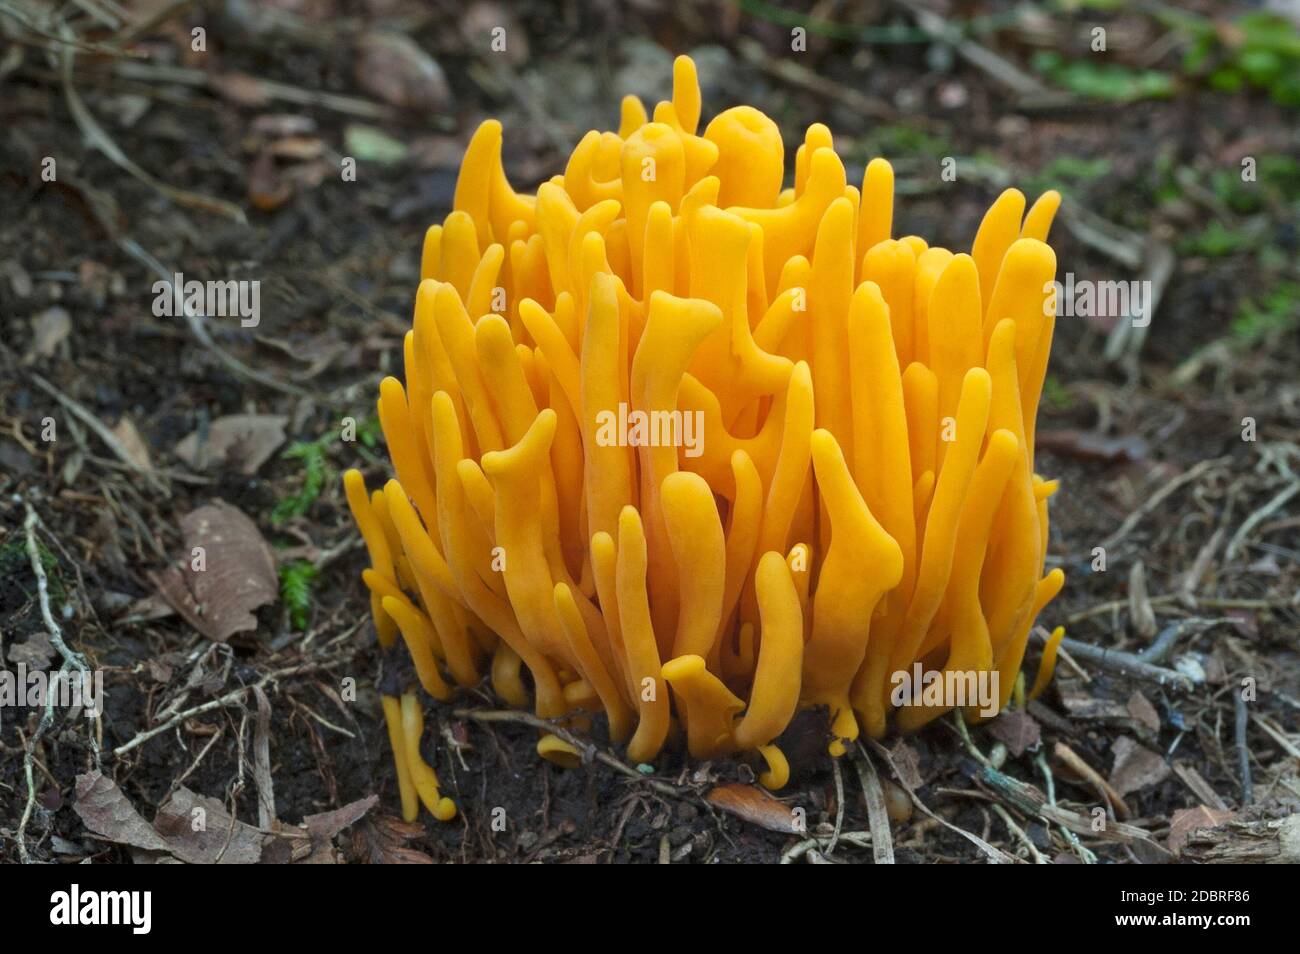 Golden spindles (Clavulinopsis fusiformis). Called Spindle-shaped yellow coral and Spindle-shaped fairy club also Stock Photo